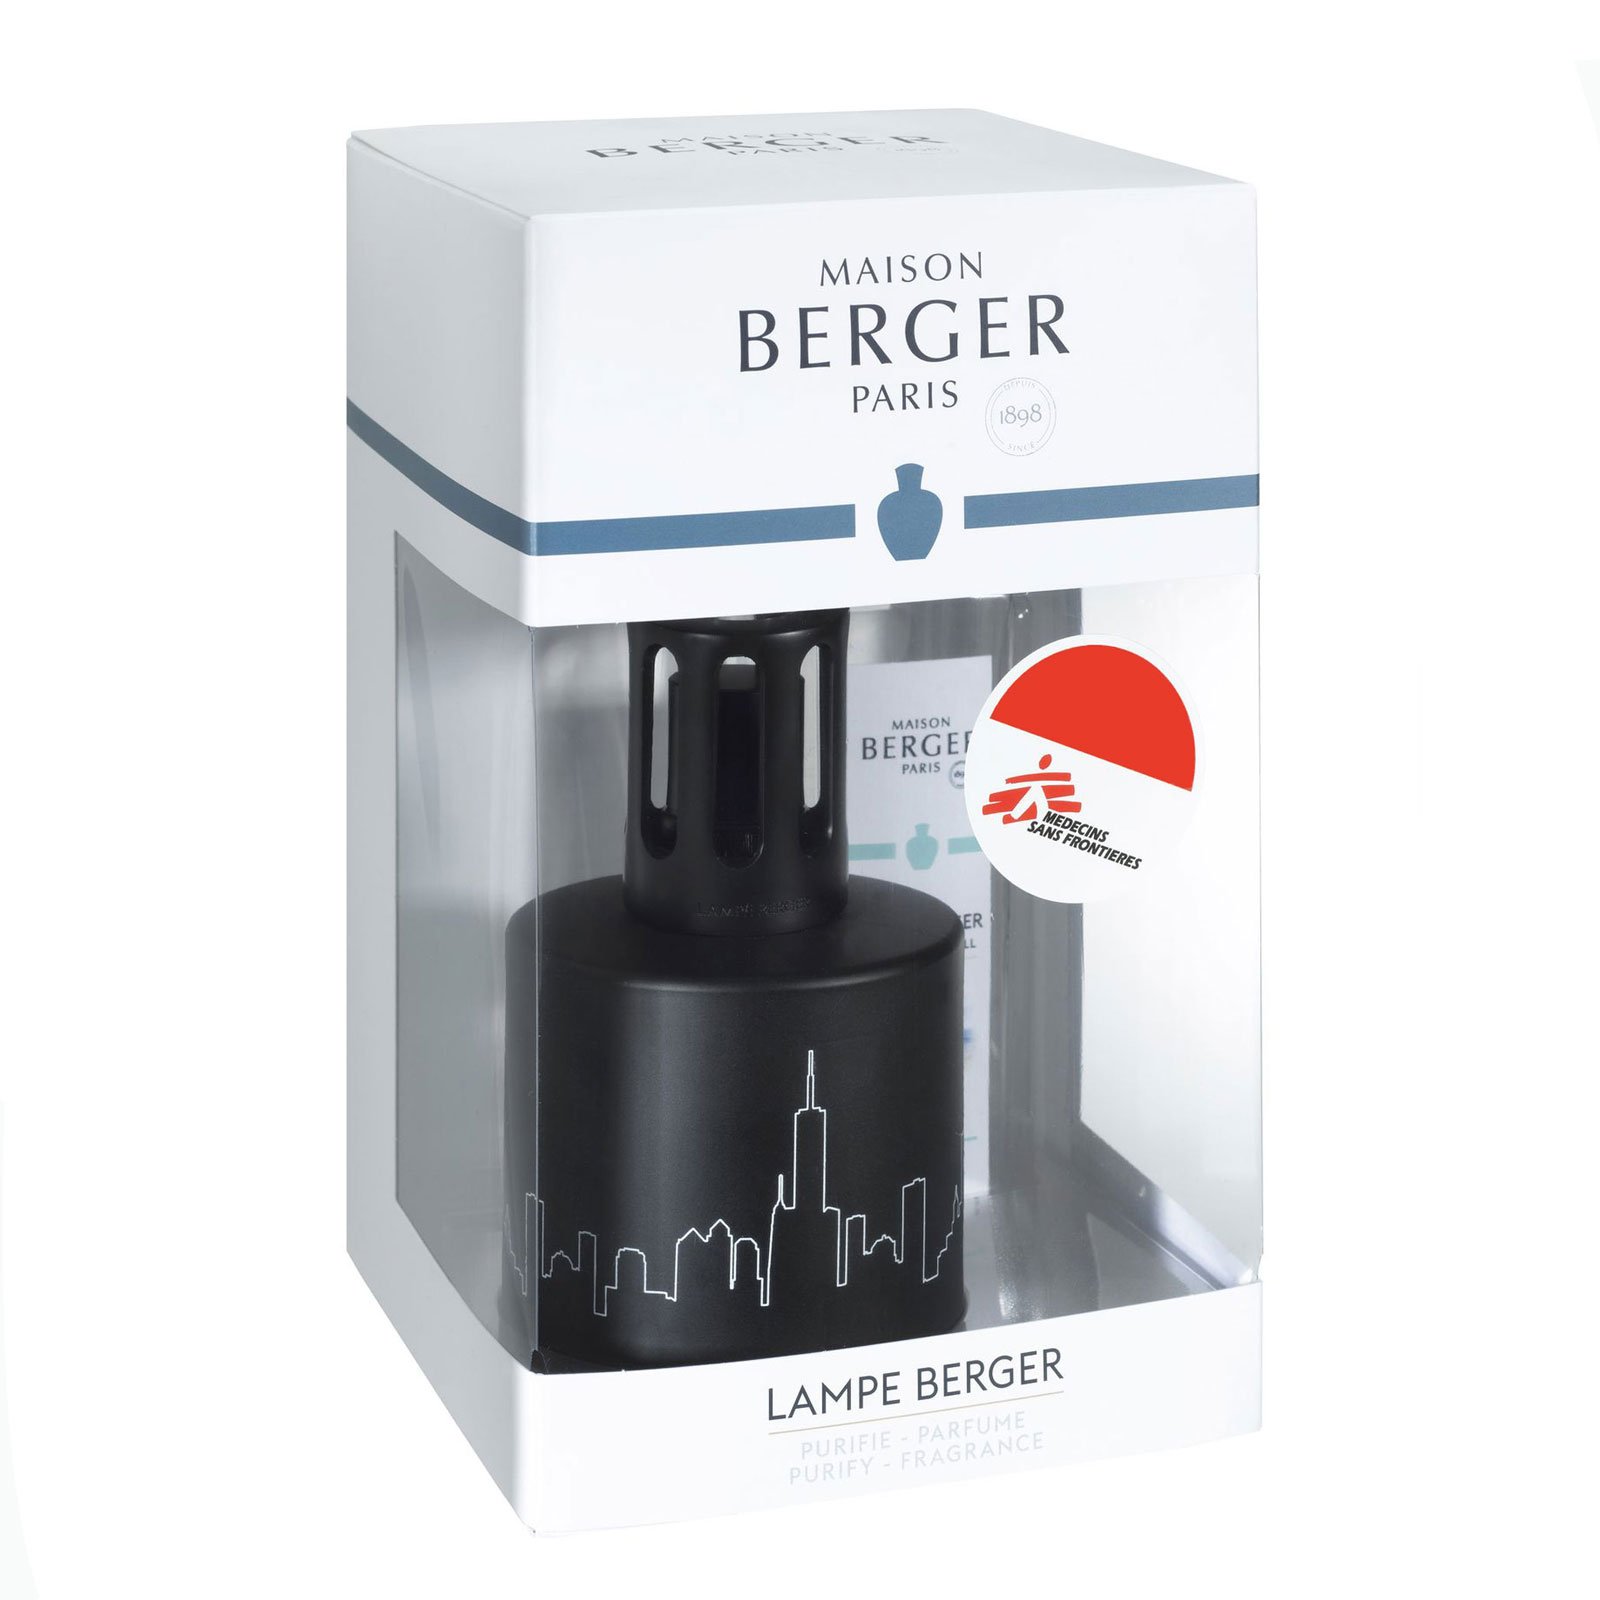 Lampe berger pure - Maison Berger x MSF • Boutique MSF